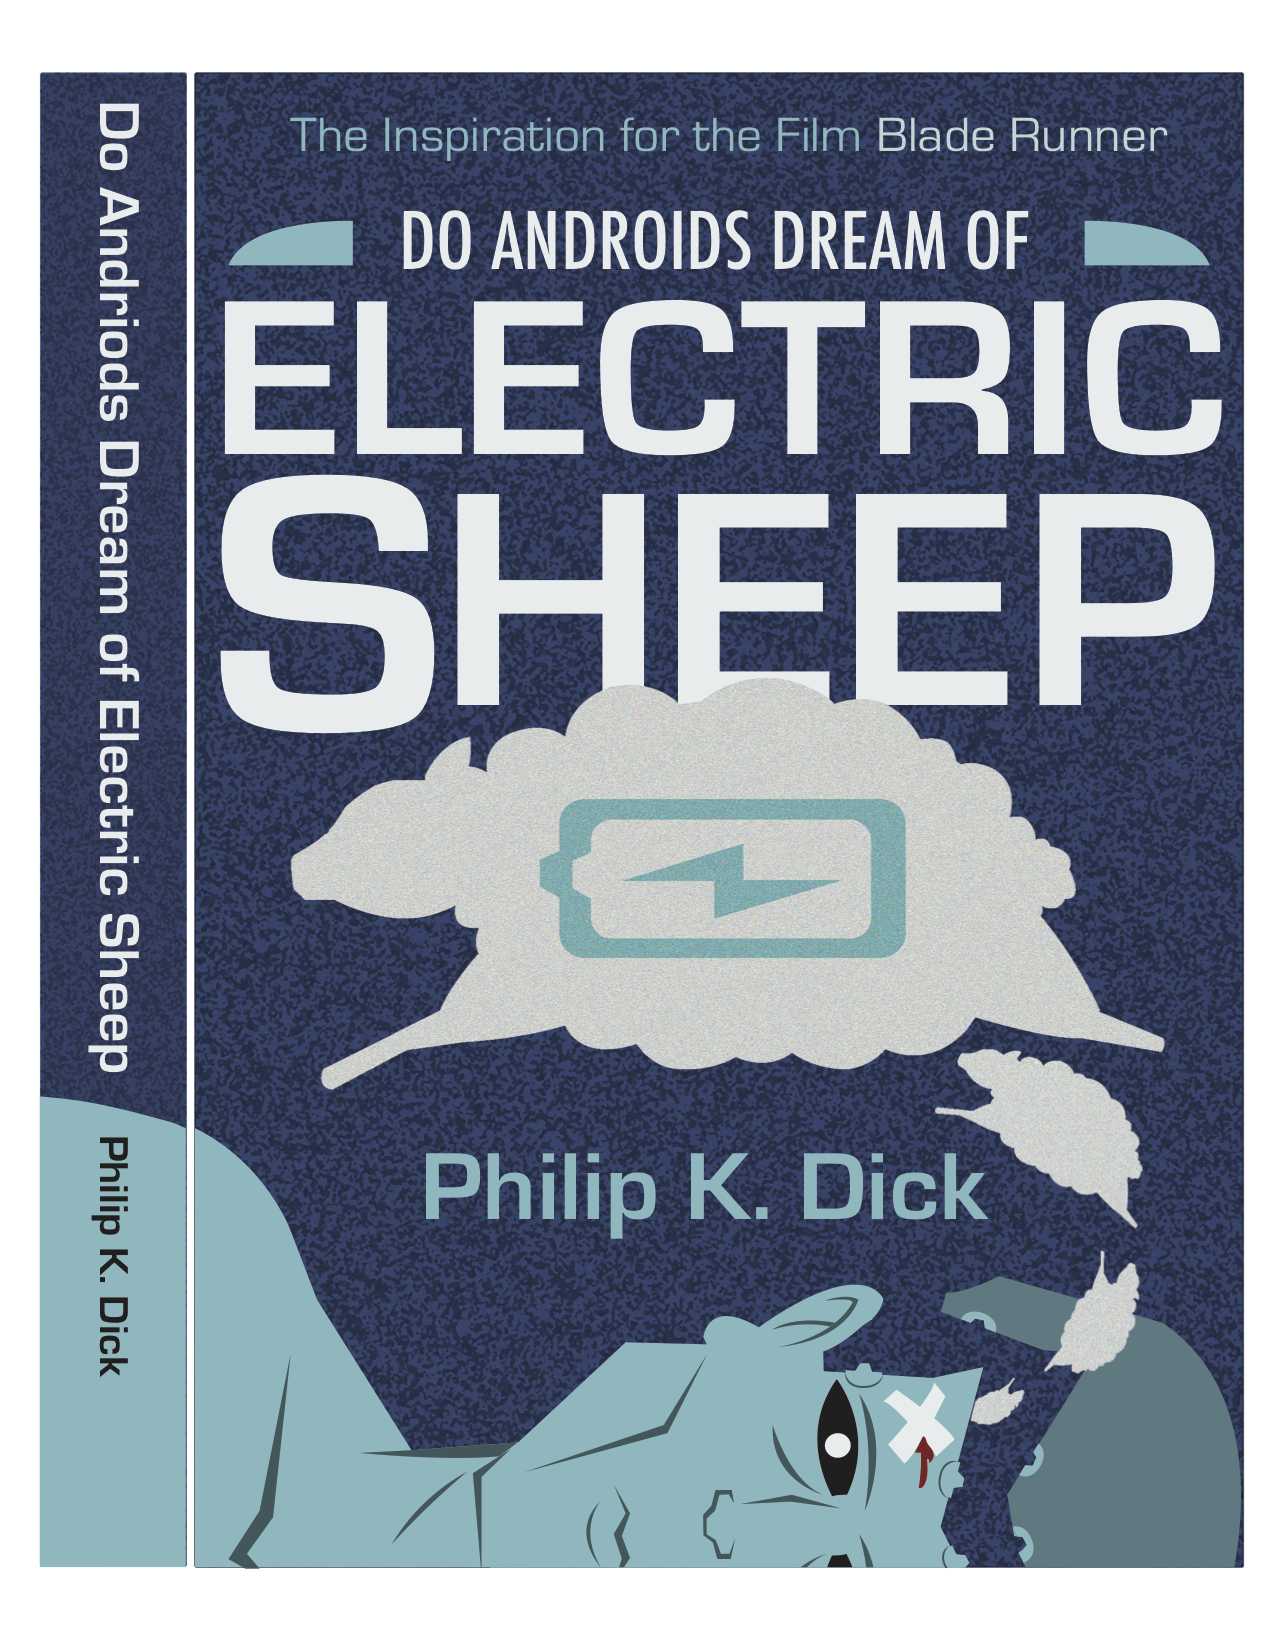 Hatch_Aaron_Electric Sheep Bookcover Redesign.jpg